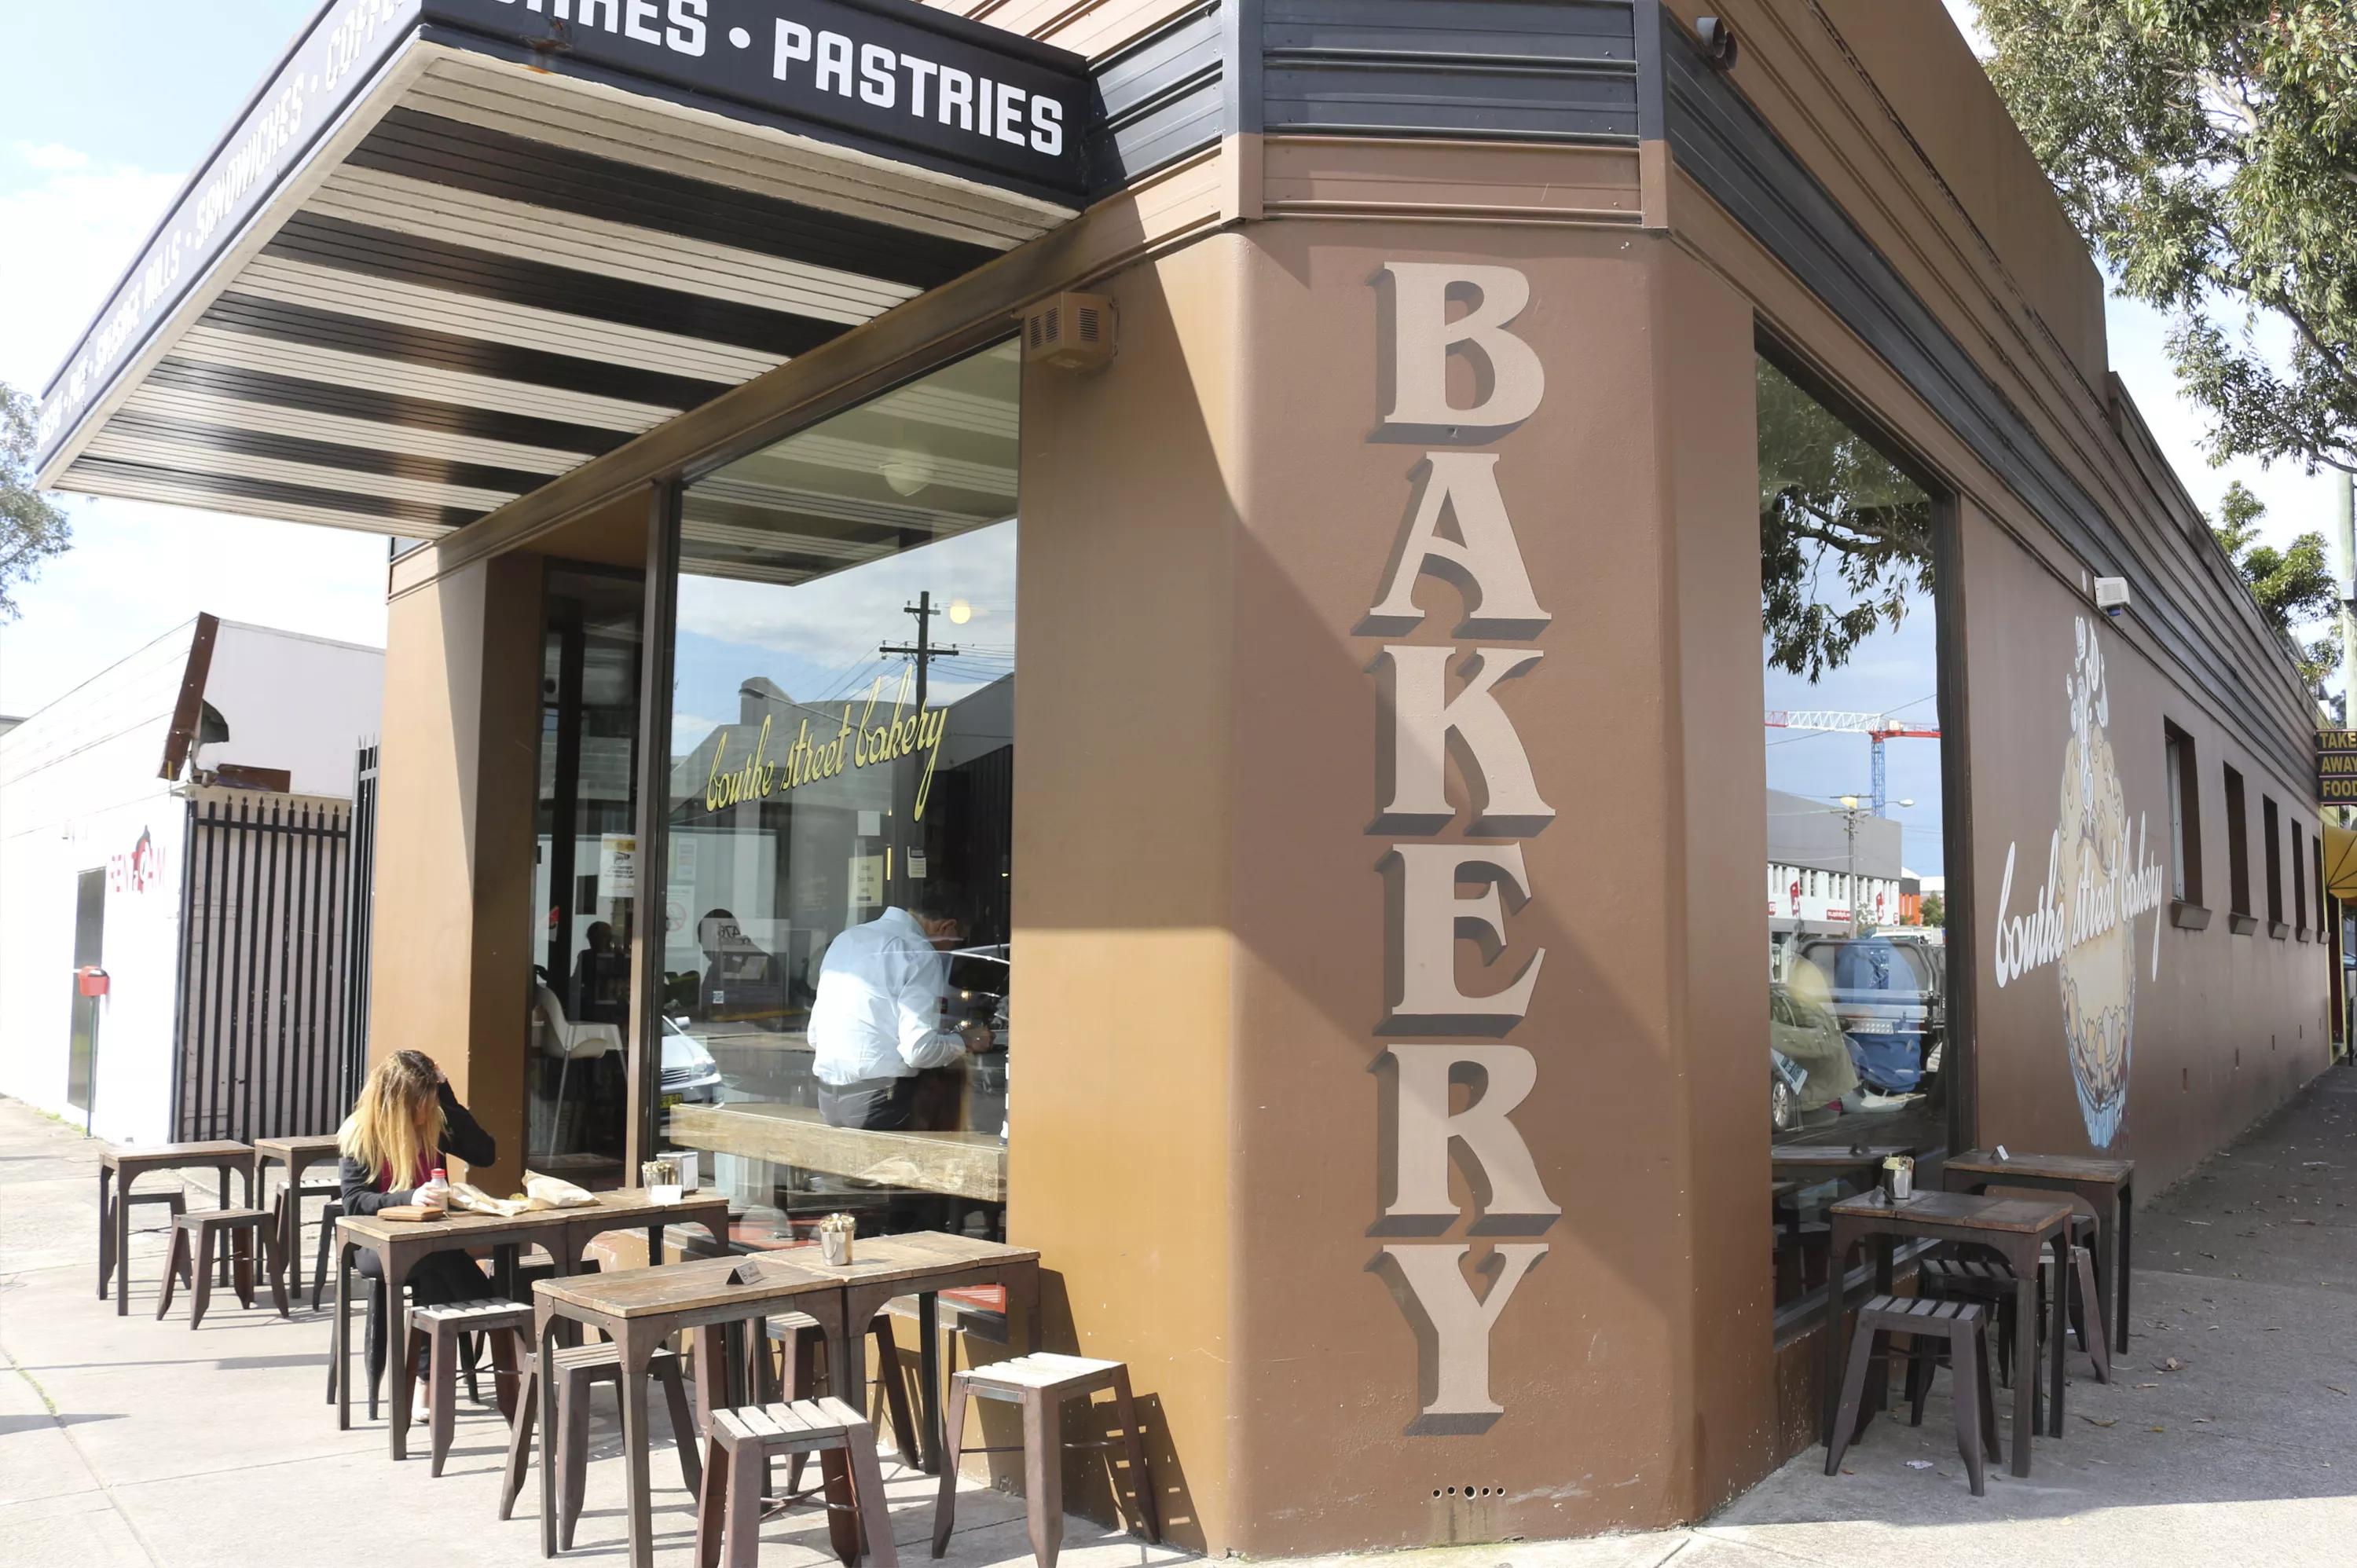 Bourke Street Bakery in Australia, Australia and Oceania | Confectionery & Bakeries - Rated 3.8